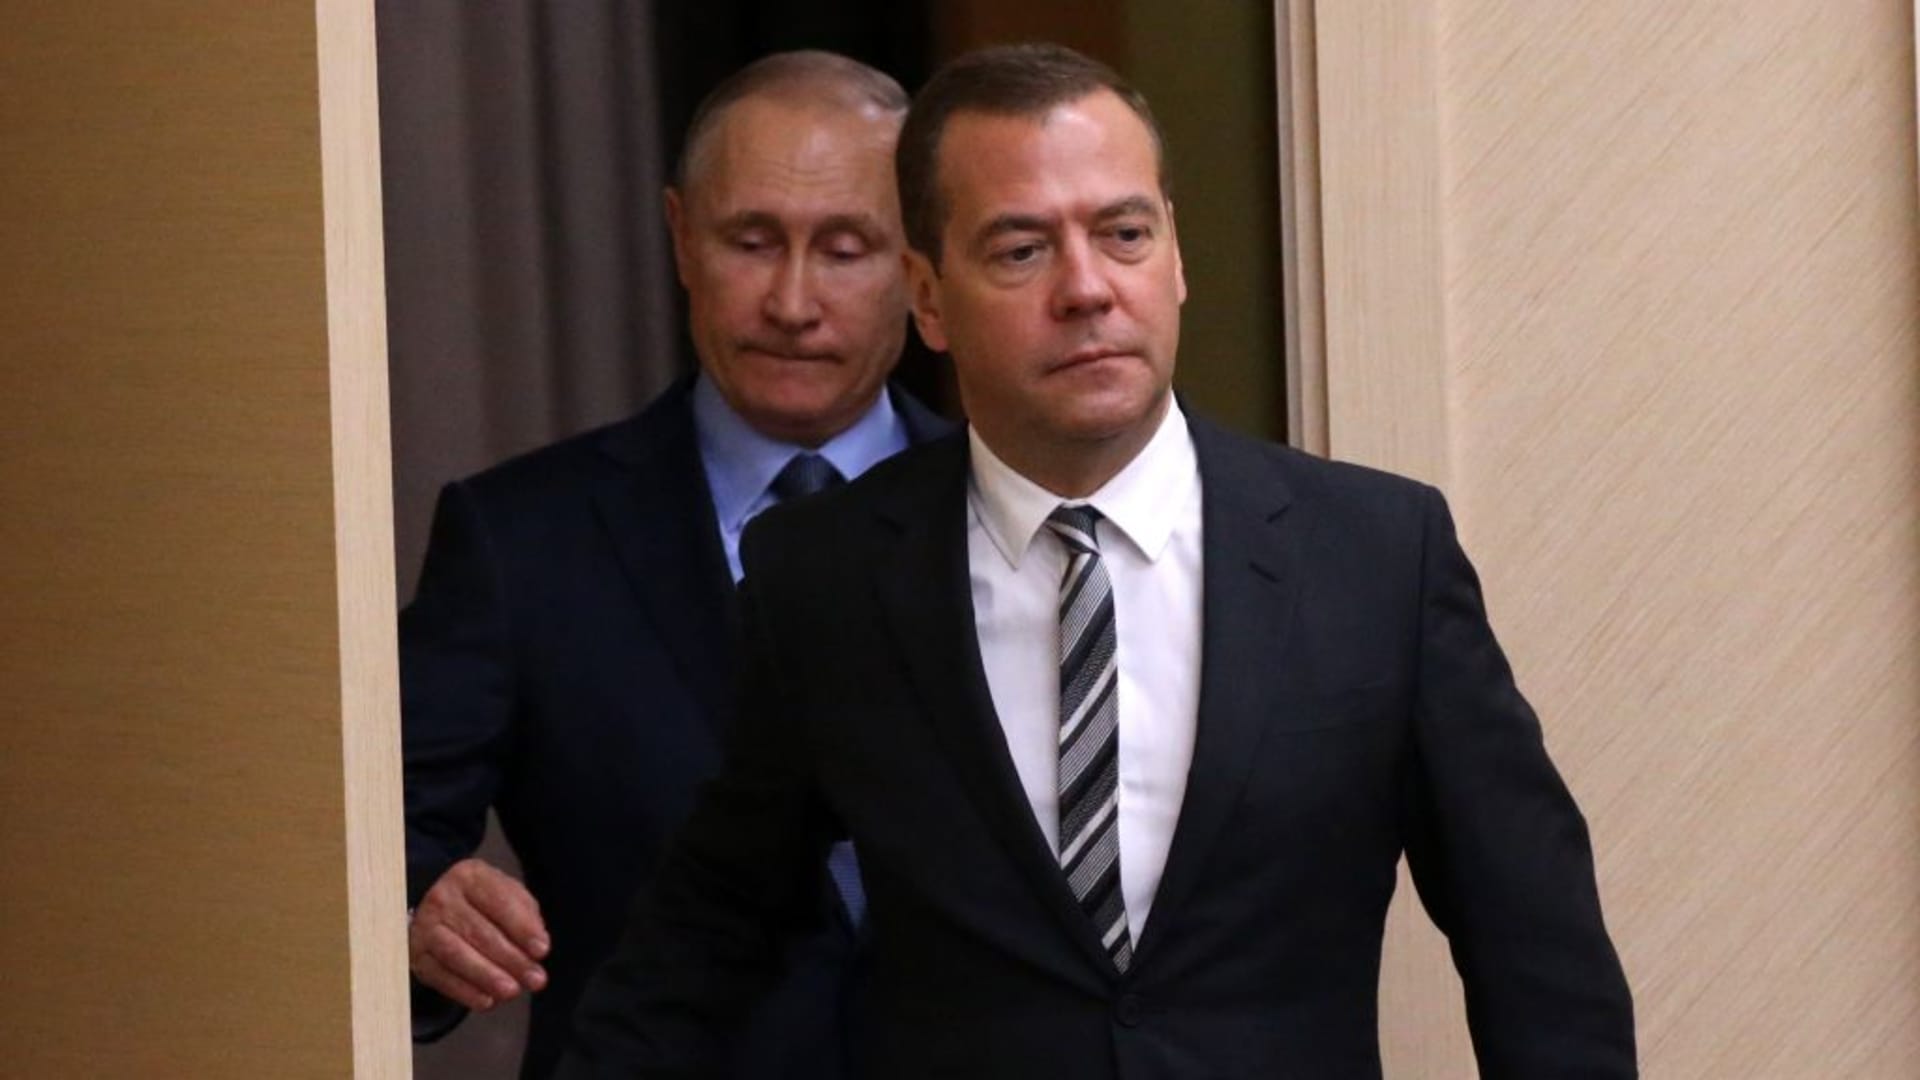 Russian and PM Dmitry Medvedev and President Vladimir Putin arrive at a meeting at Novo-Ogaryovo State Residence on July 28, 2017 outside of Moscow, Russia.